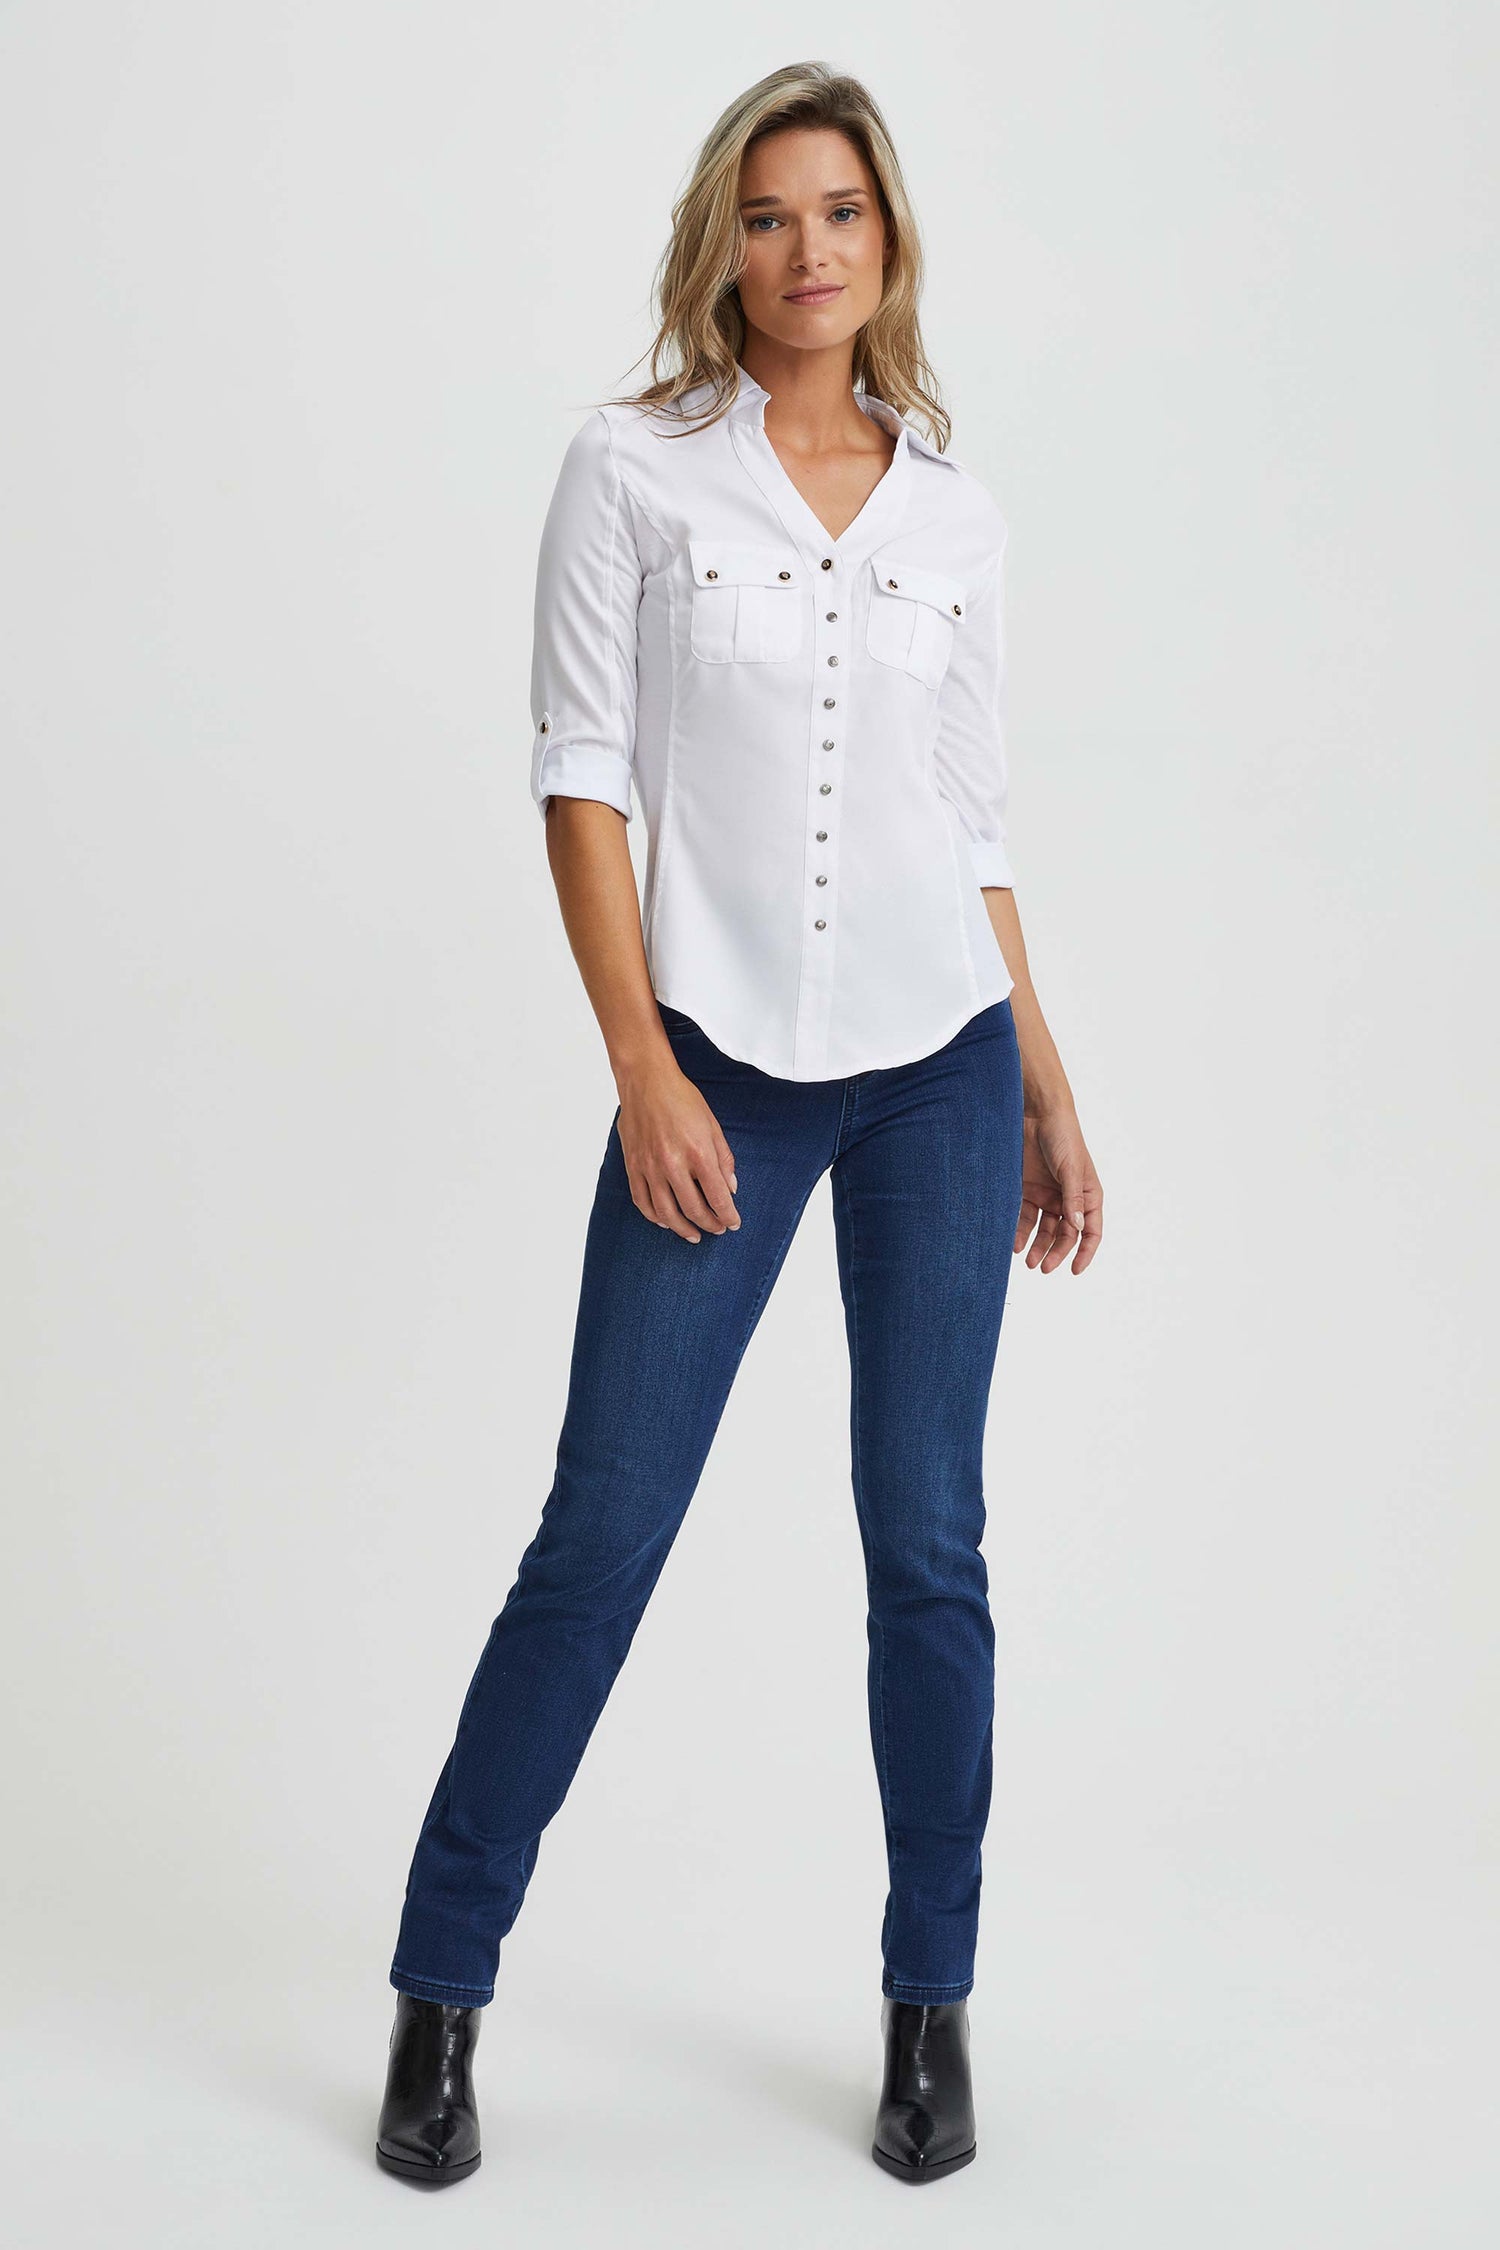 Fitted blouse with pockets